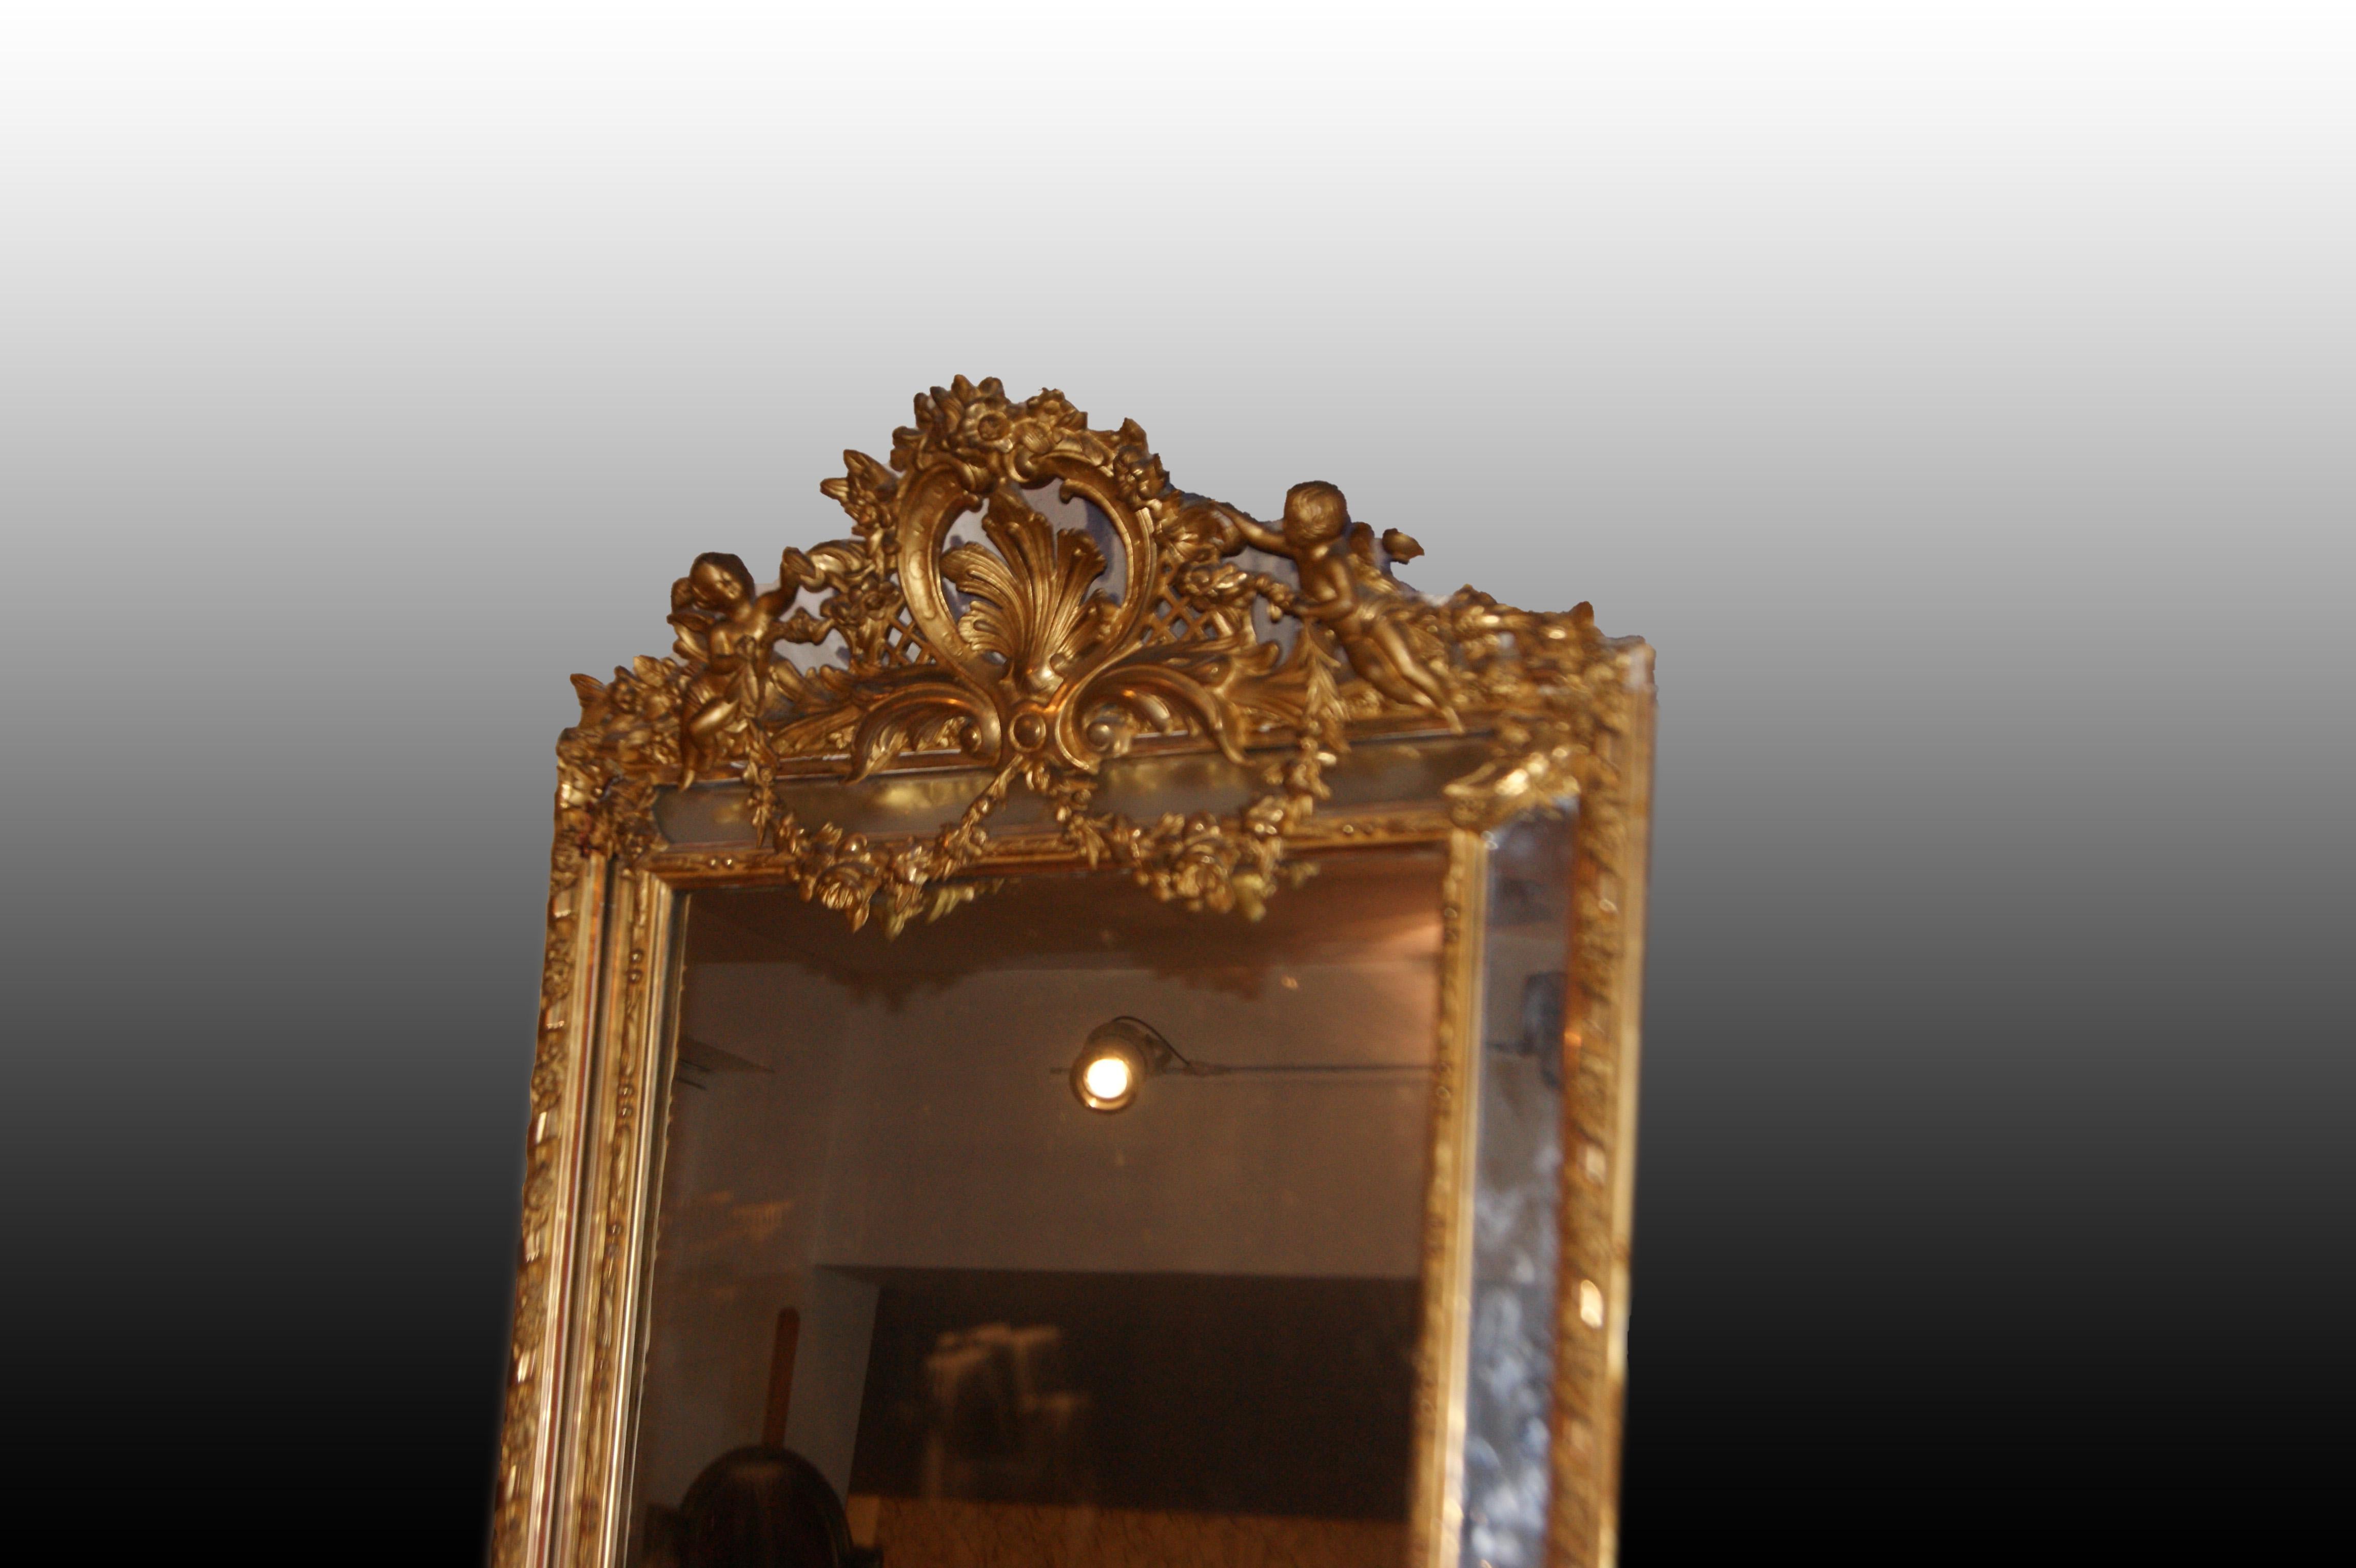 Large, rich French rectangular vertical mirror from the Mid-1800s, in the Louis XVI style, with a gilded gold leaf wooden frame. The frame is exquisitely finished with an elaborate cornice in the upper body featuring putti.

Origin: